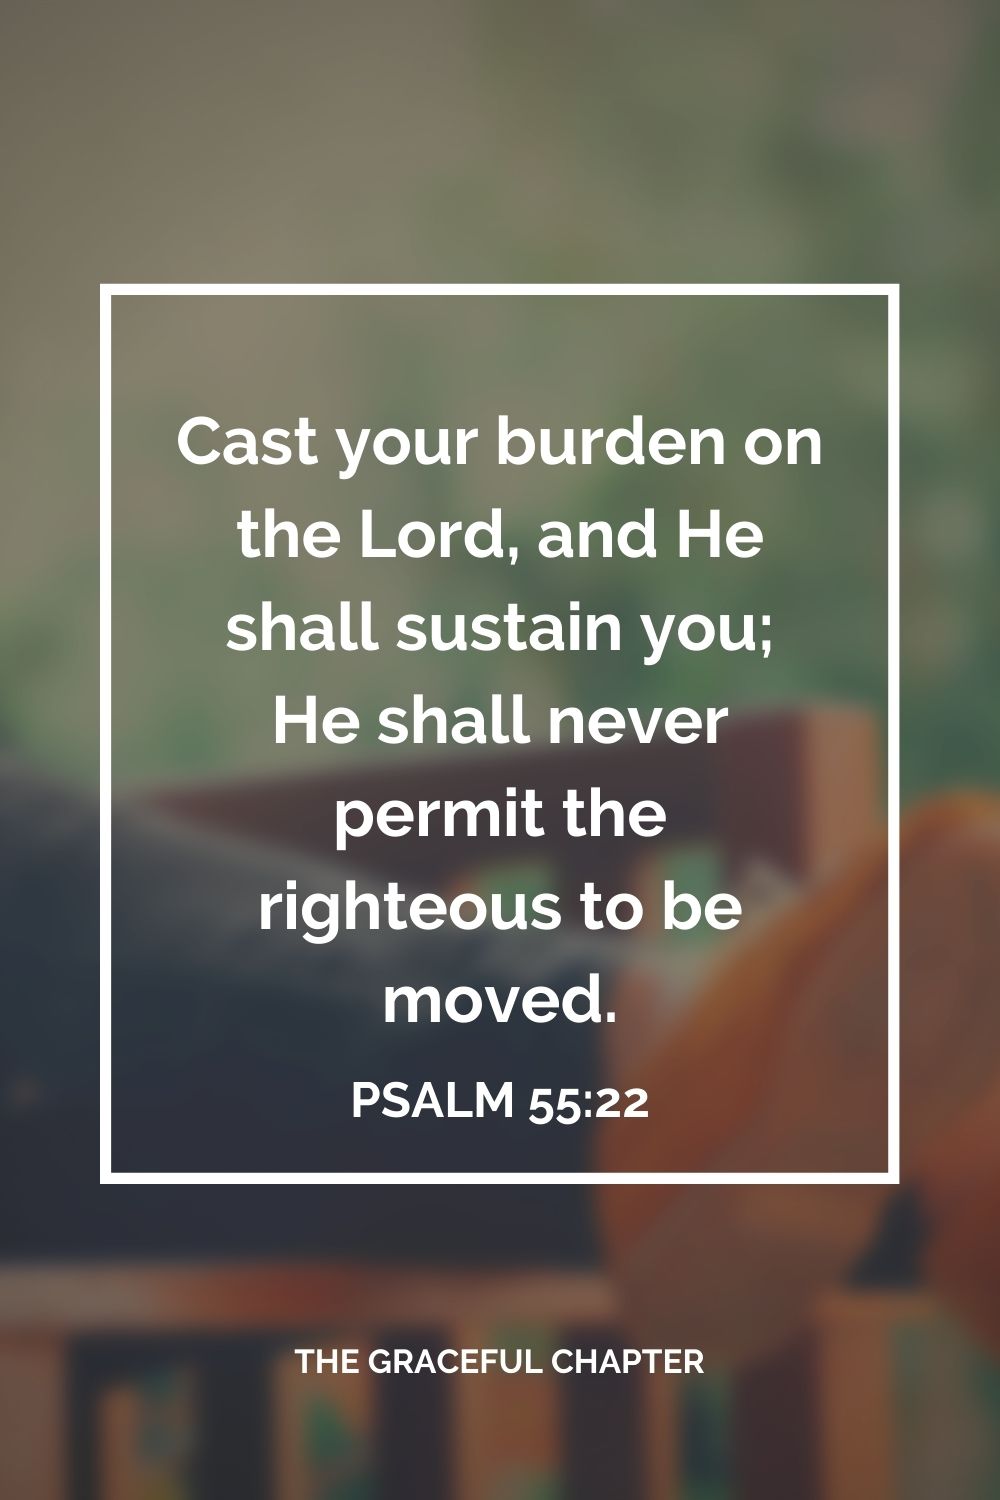 Cast your burden on the Lord, and He shall sustain you; He shall never permit the righteous to be moved. Psalm 55:22